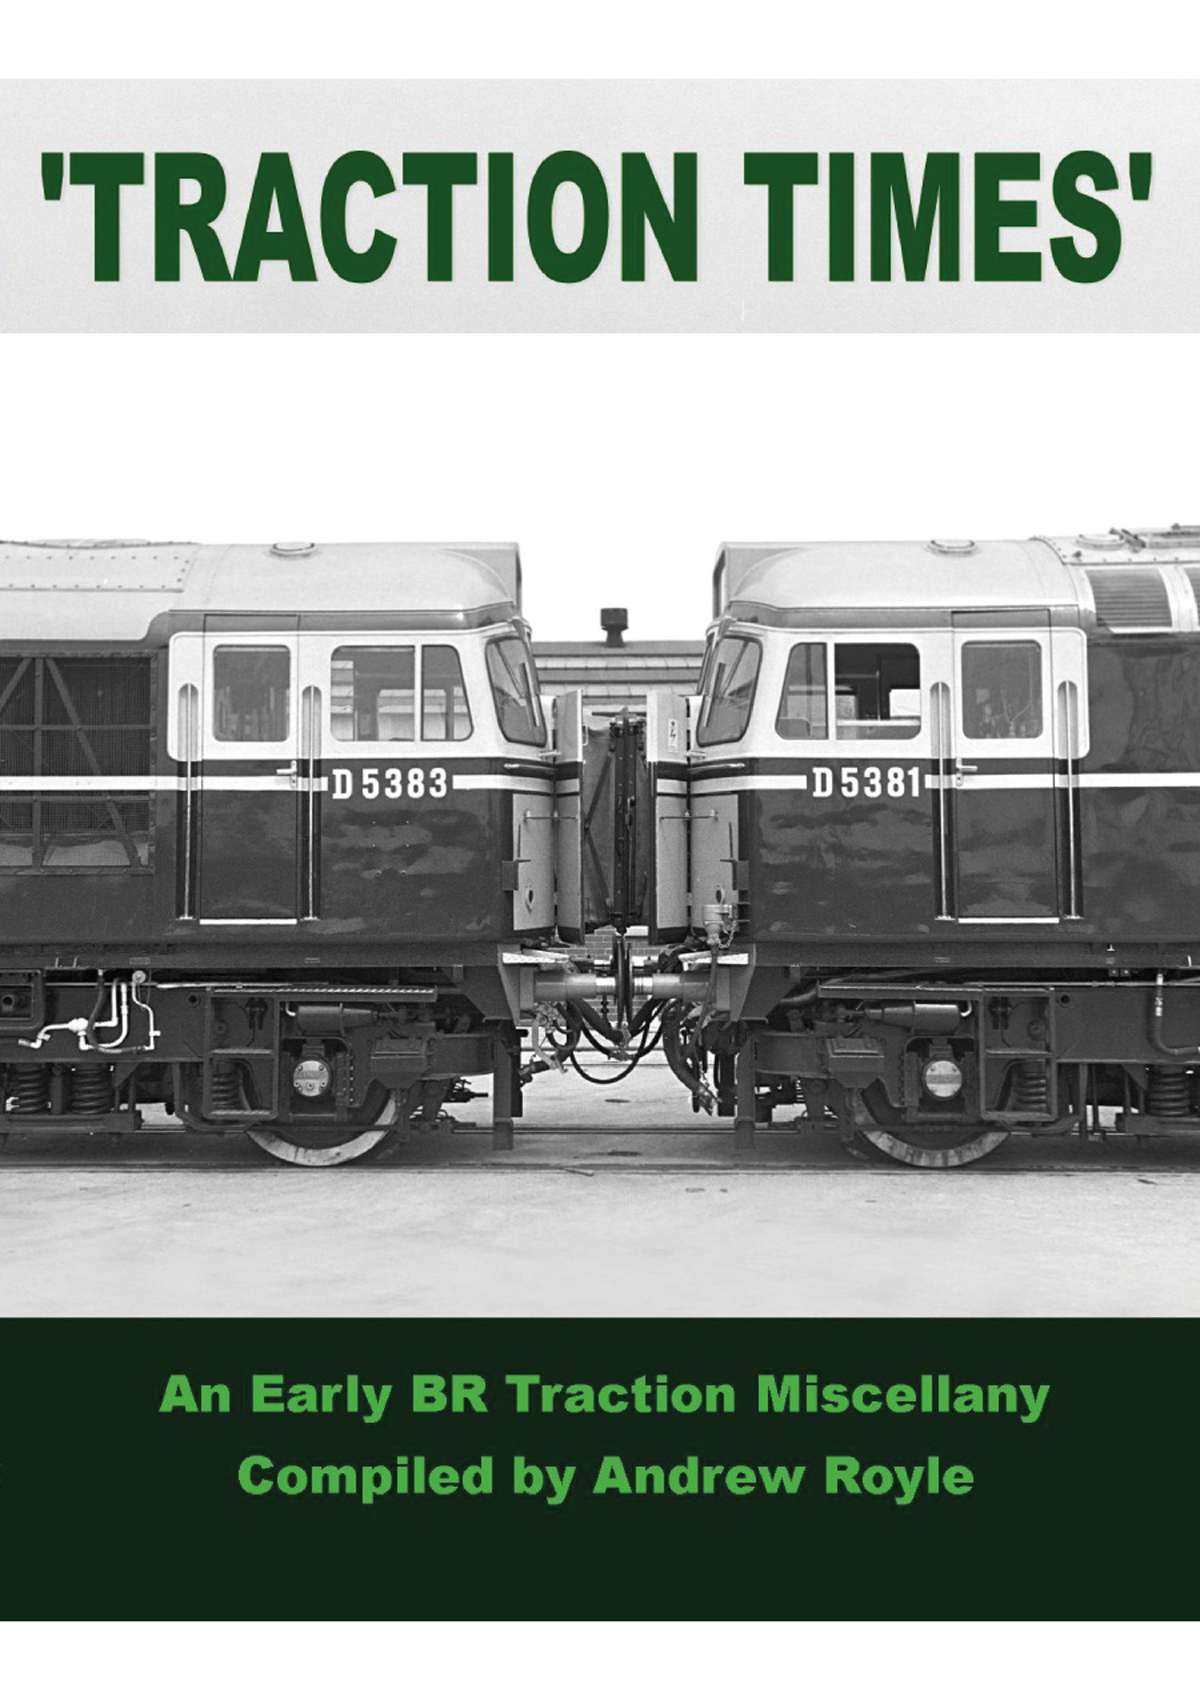 Traction Times: A Second Selection